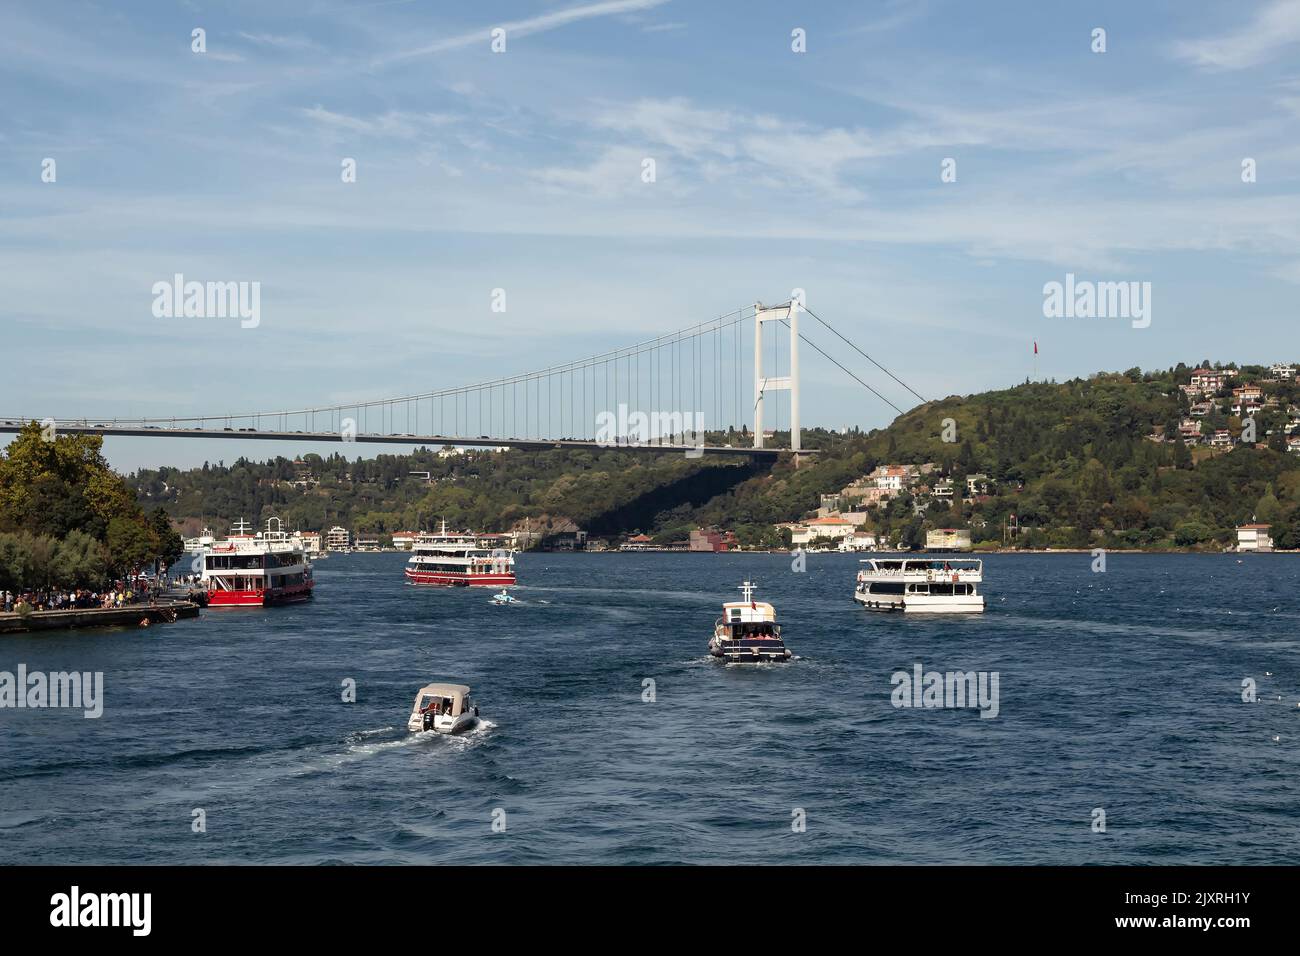 View of cruise tour boats passing on Bosphorus and FSM bridge in Istanbul. It is a sunny summer day. Beautiful travel scene. Stock Photo